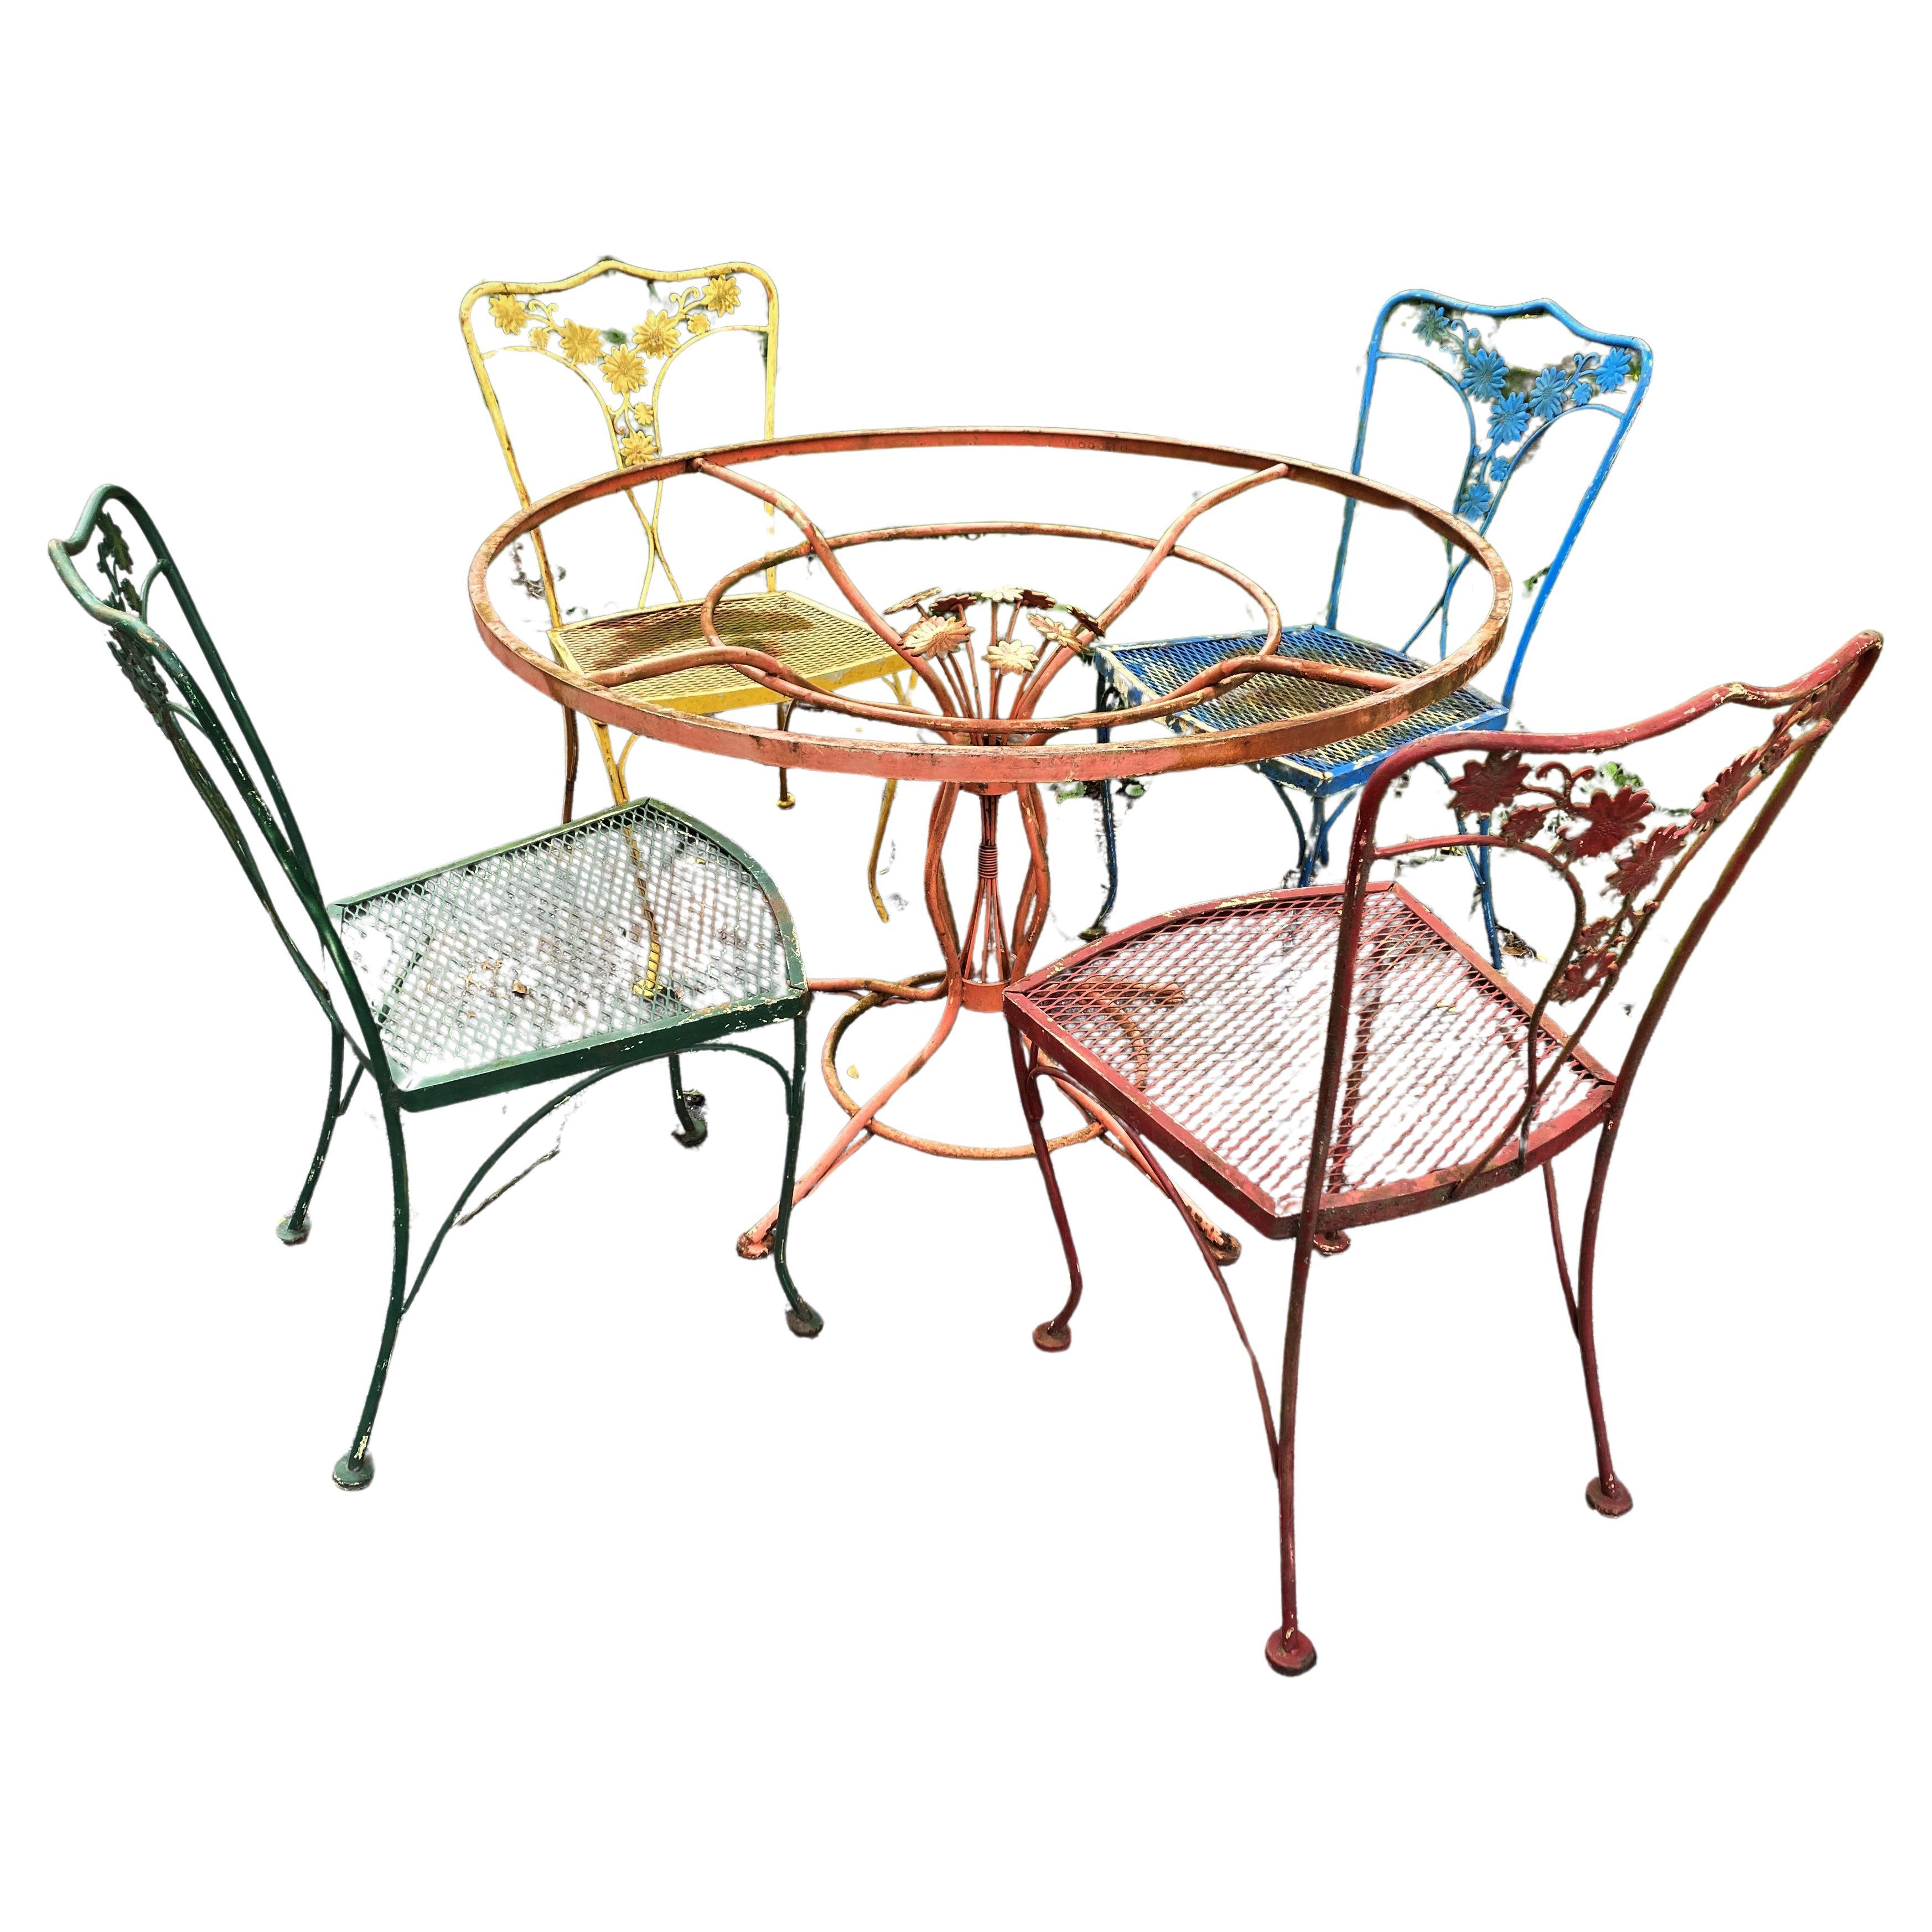 Woodard Wrought Iron Patio Table with Flower Center & 4 Chairs For Sale